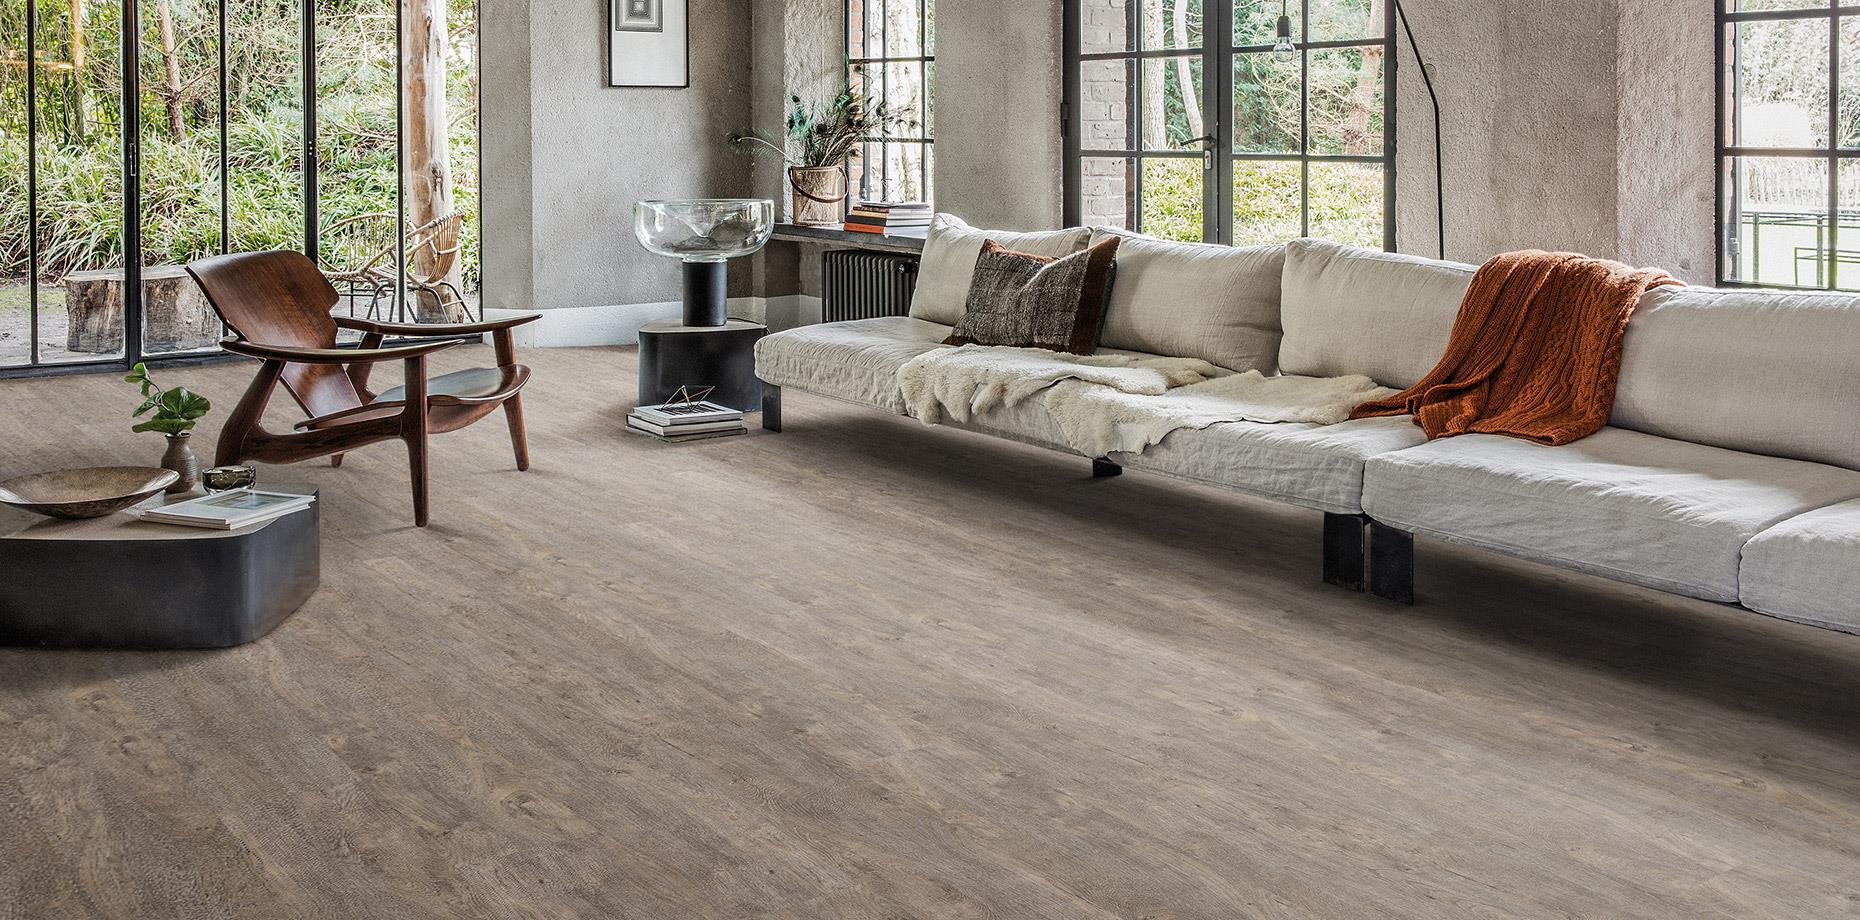 Resilient Flooring – These Are The Advantages You Need To Know About